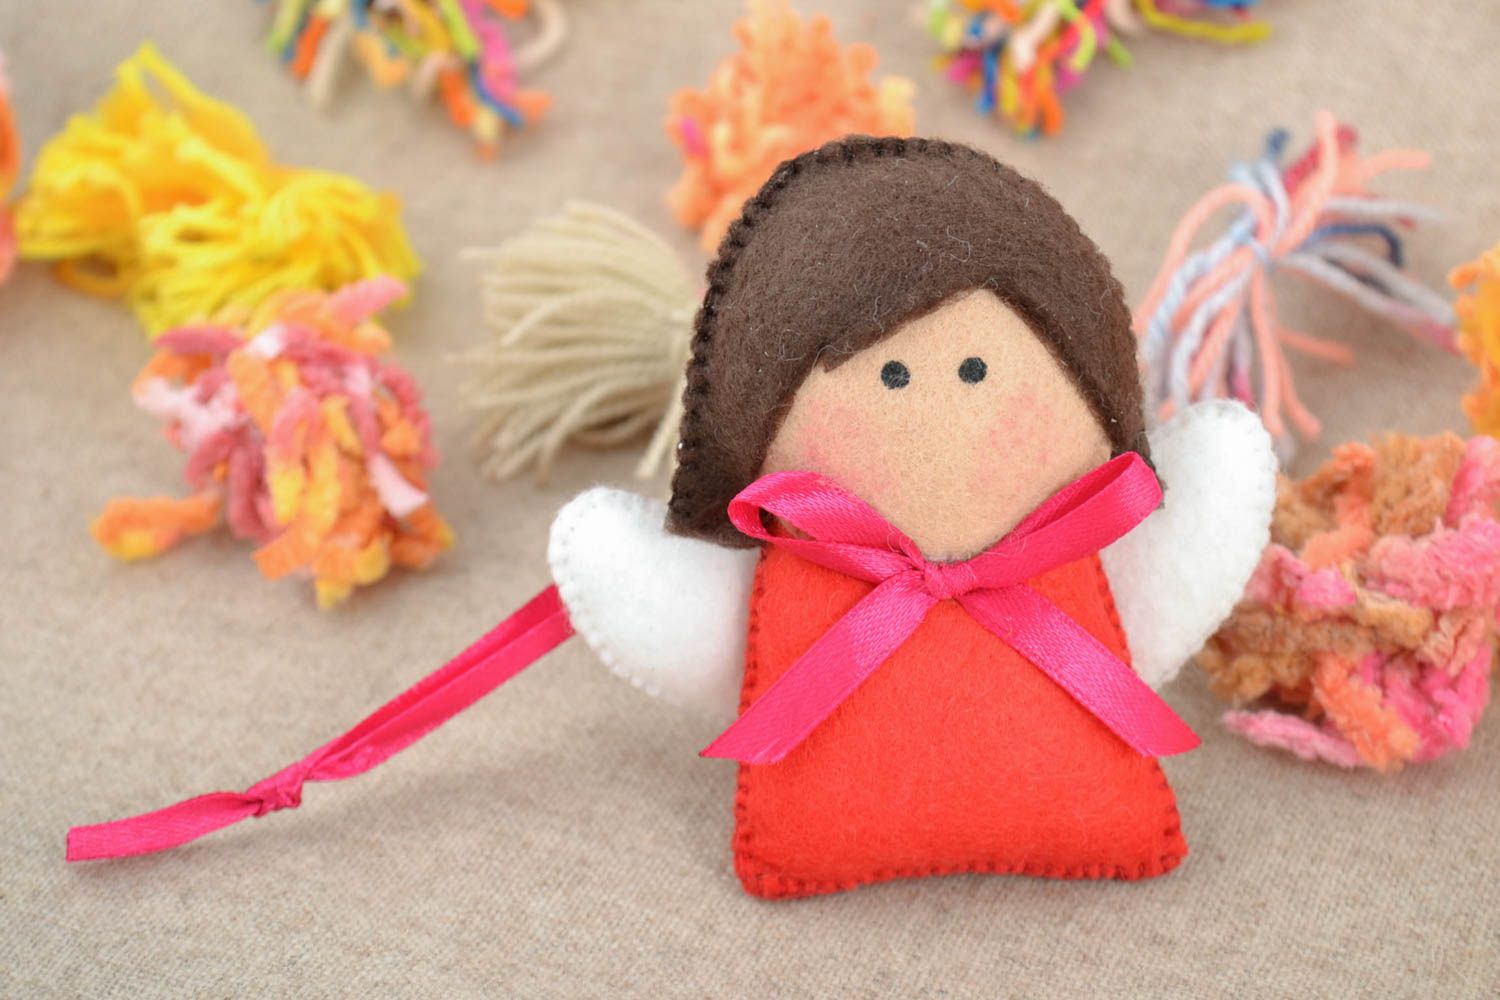 Small funny handmade felt soft wall hanging toy angel for home decor photo 1